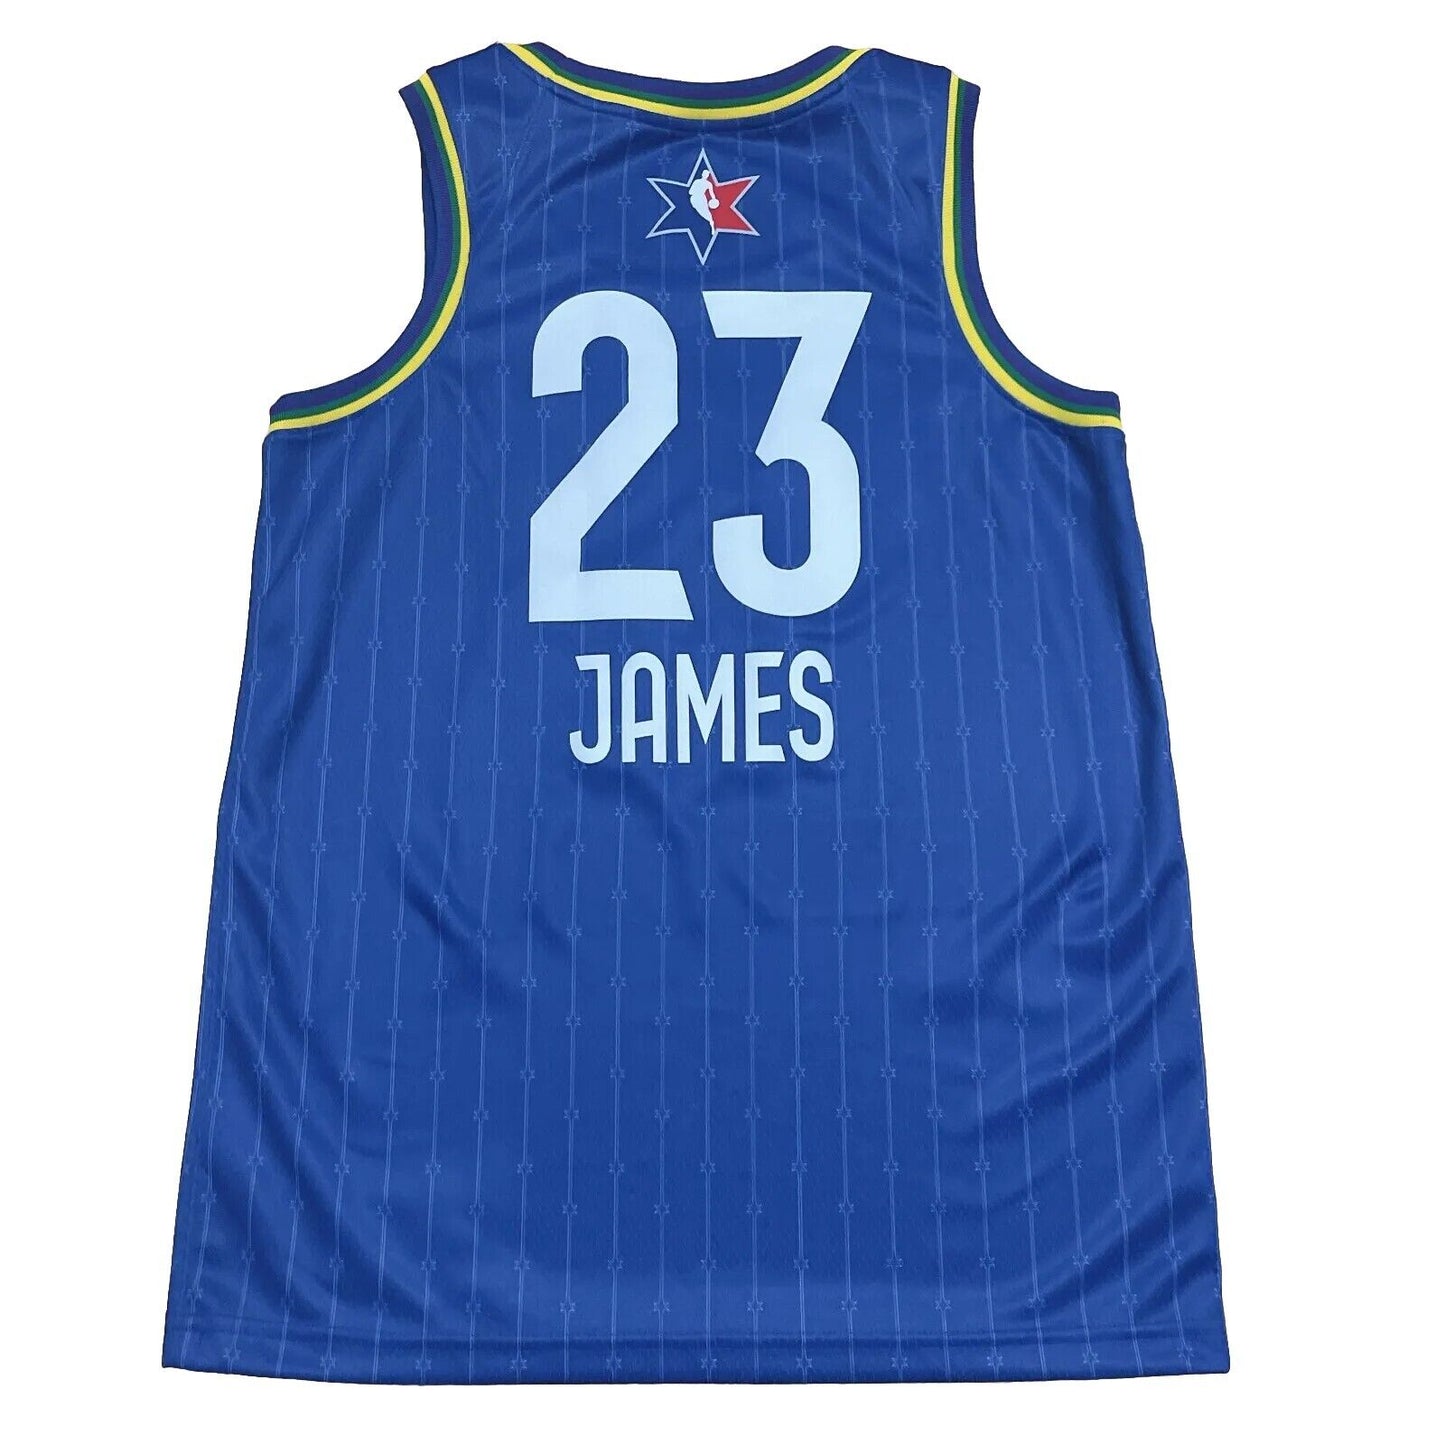 100% Authentic Lebron James 2020 NBA All Star Game Jersey Size M 44 Mens